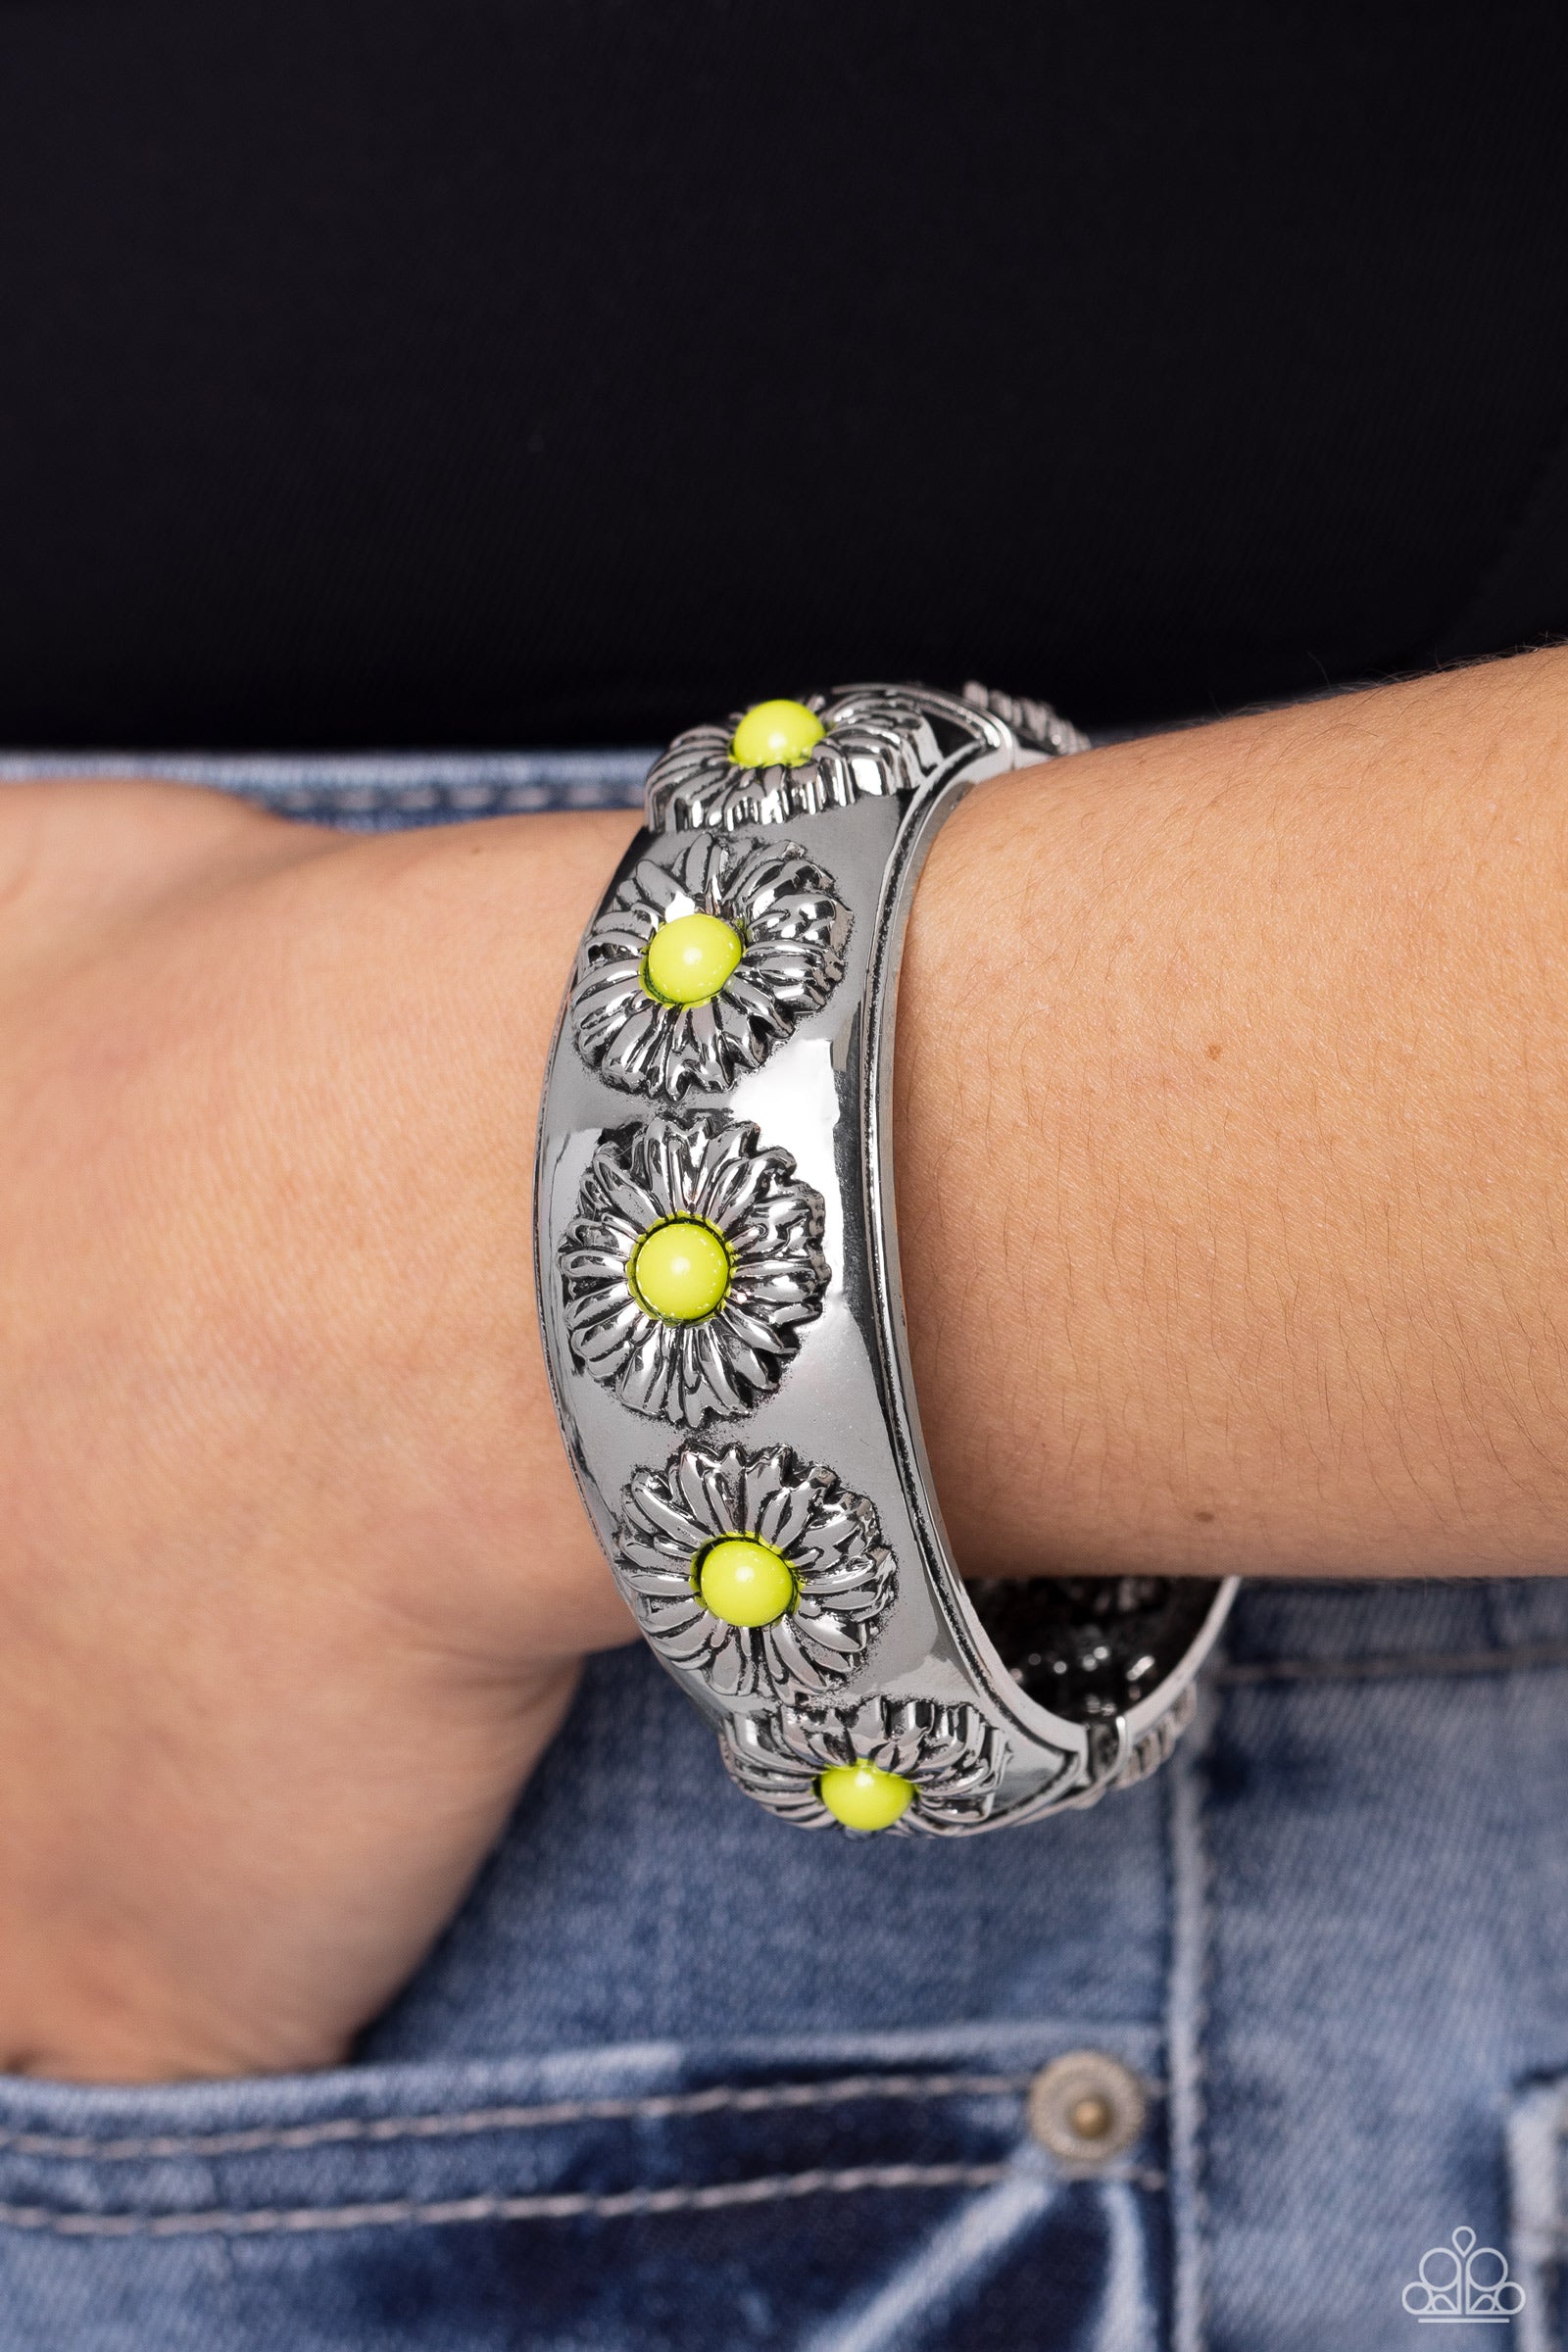 Bird and Floral Silver Cuff Bracelet